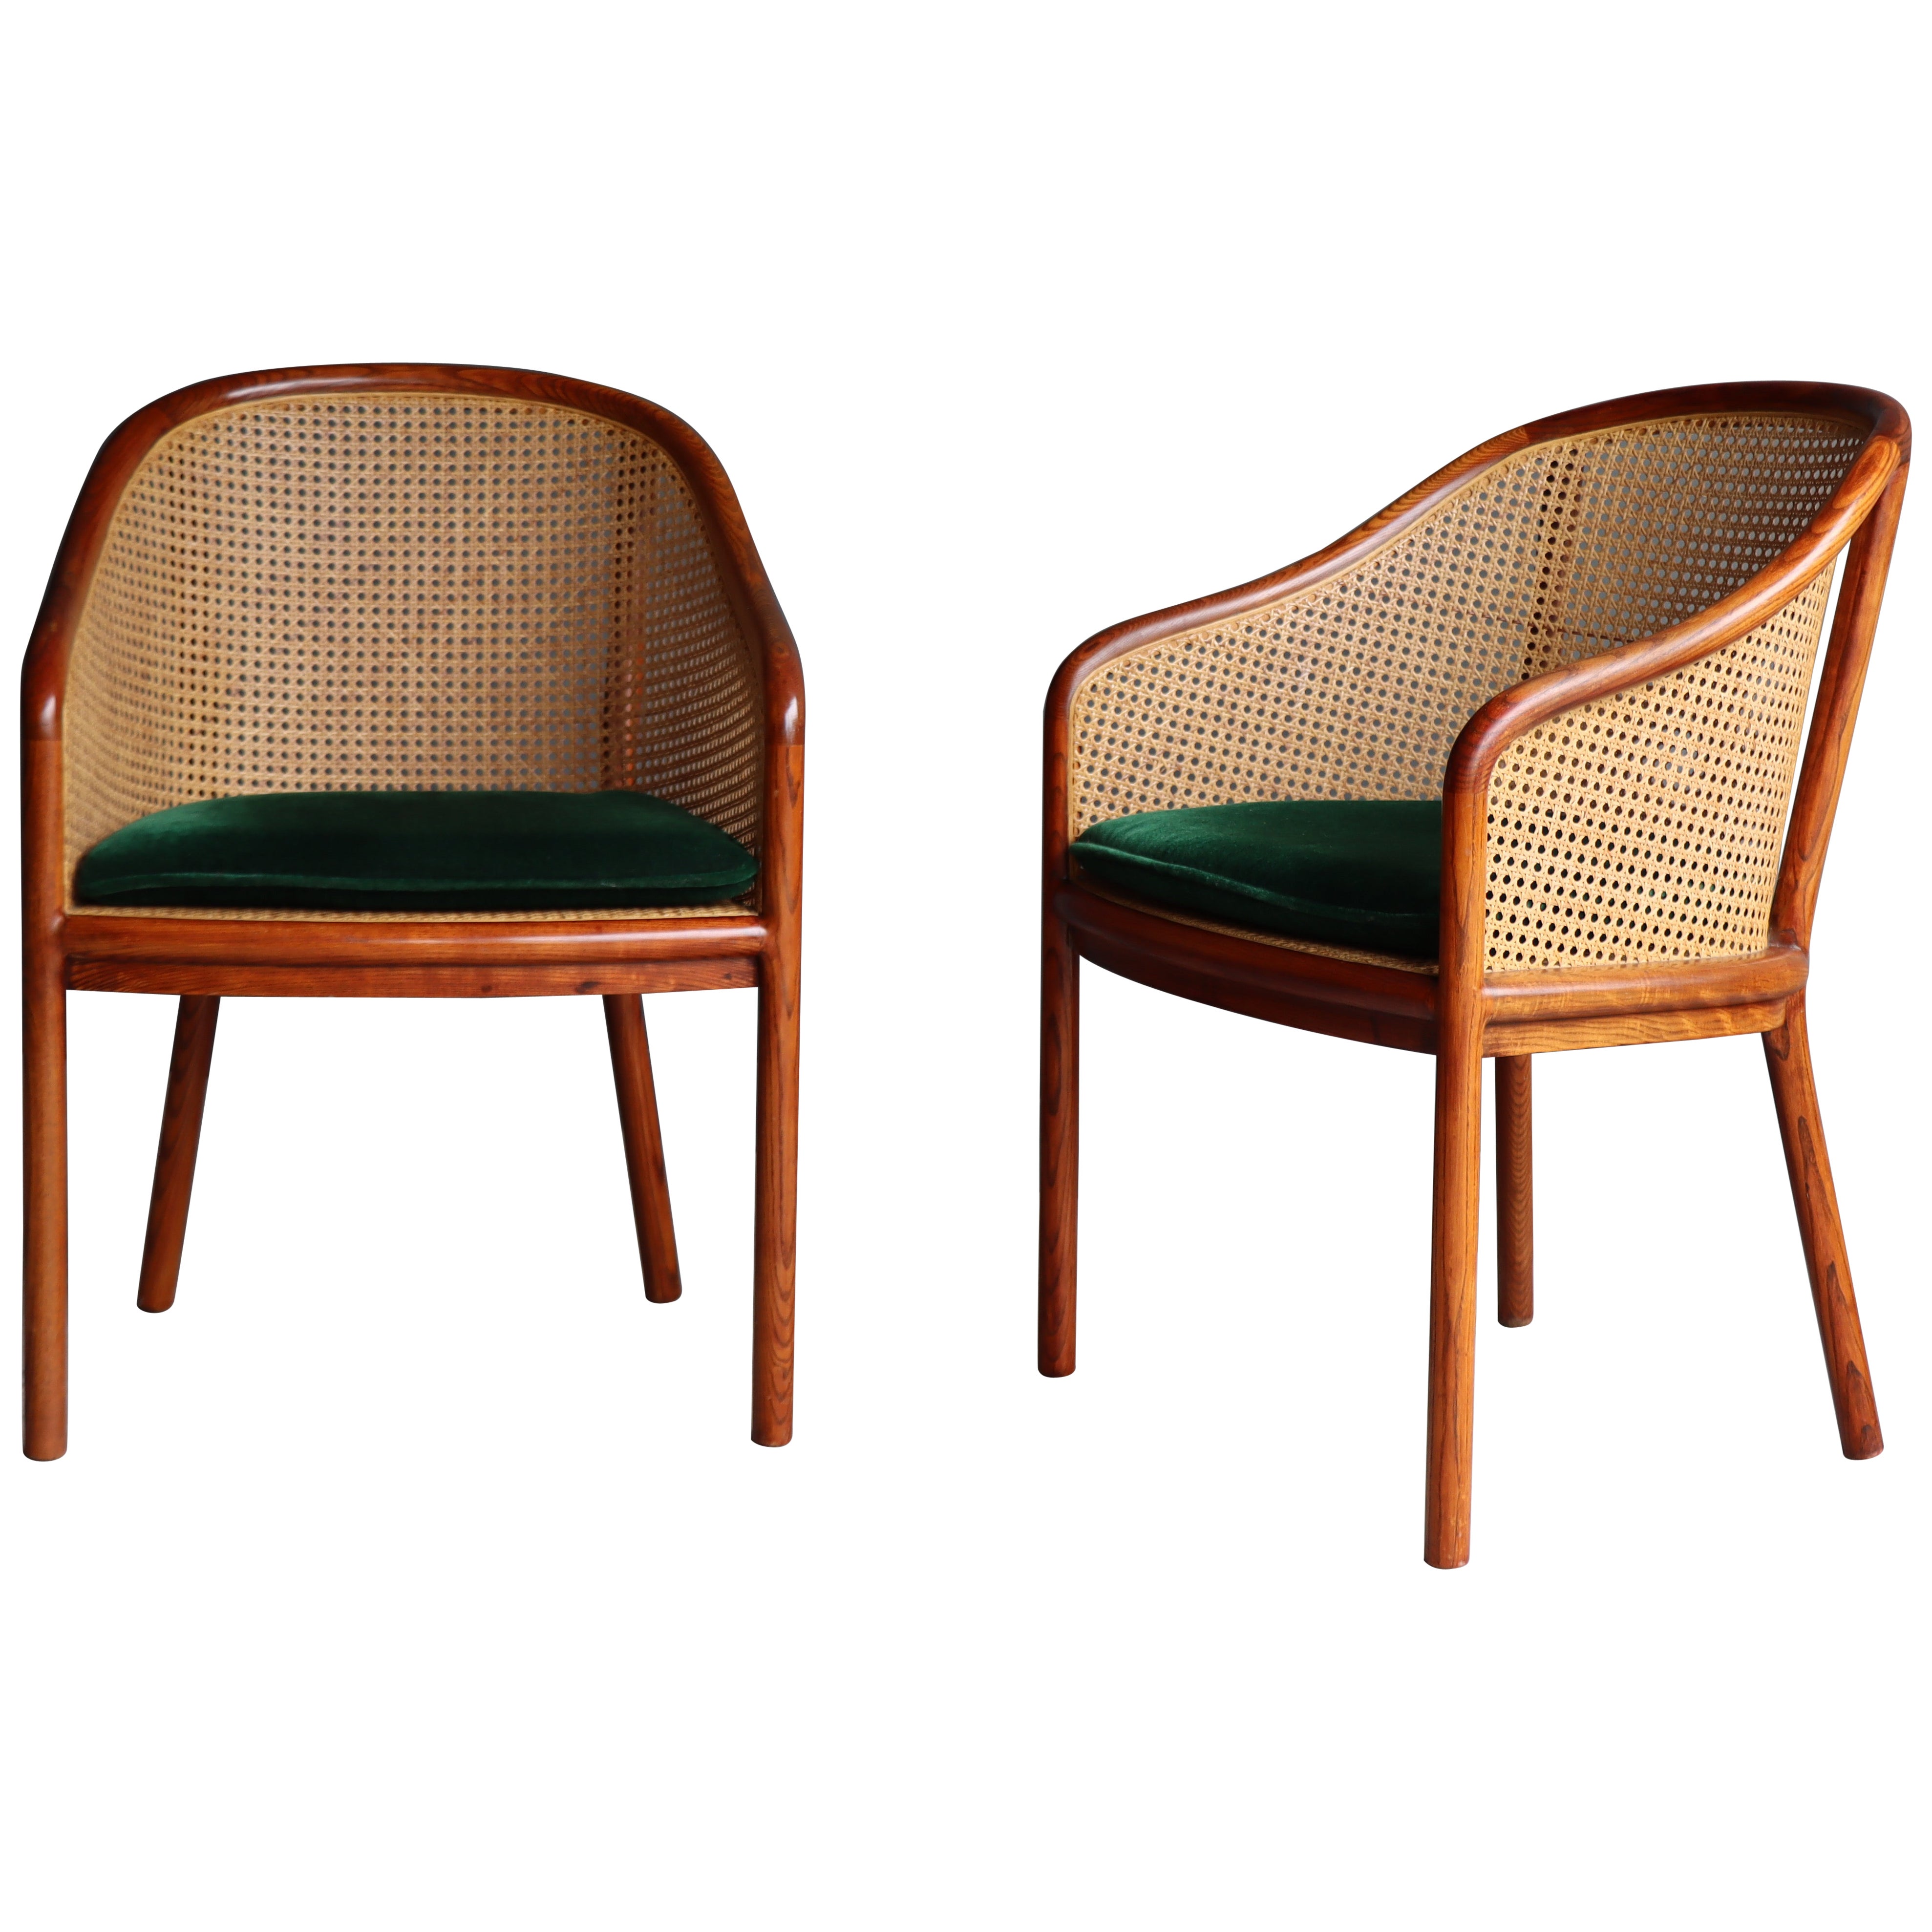 Vintage Pair of ‘Landmark’ Cane Chairs by Ward Bennett for Brickel, 1970, Mohair For Sale